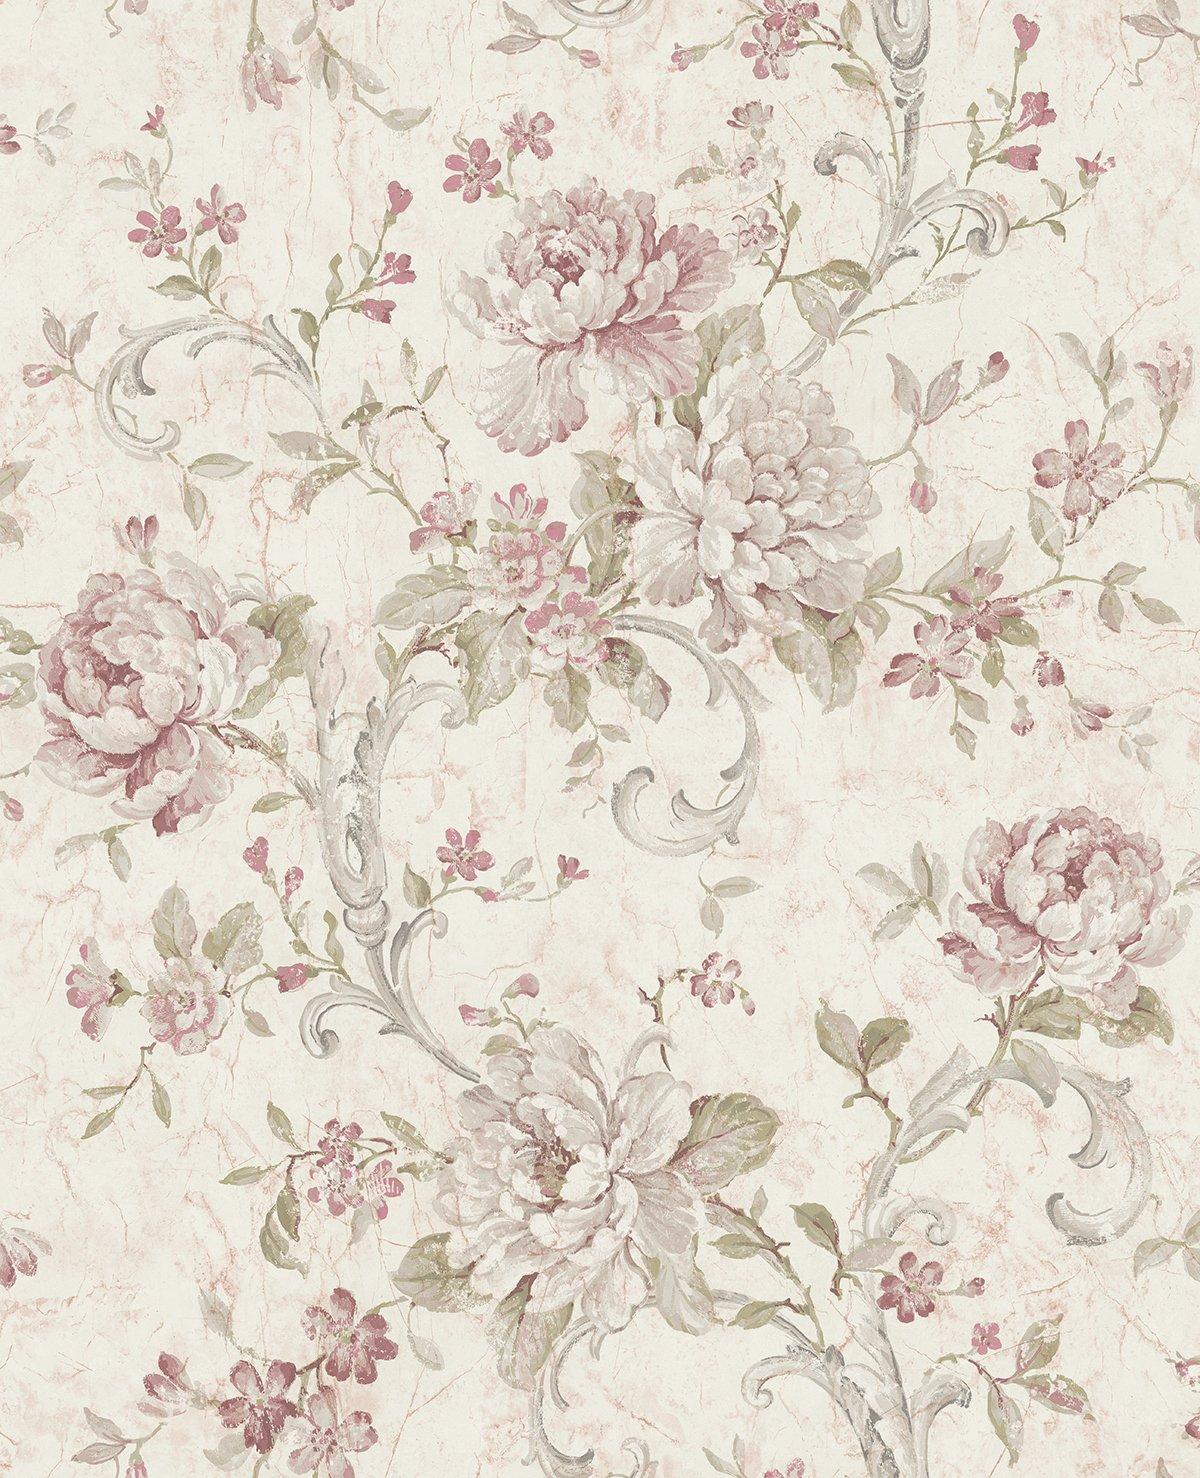 Antiqued Rose Wallpaper in Dusty Mauve from the Vintage Home